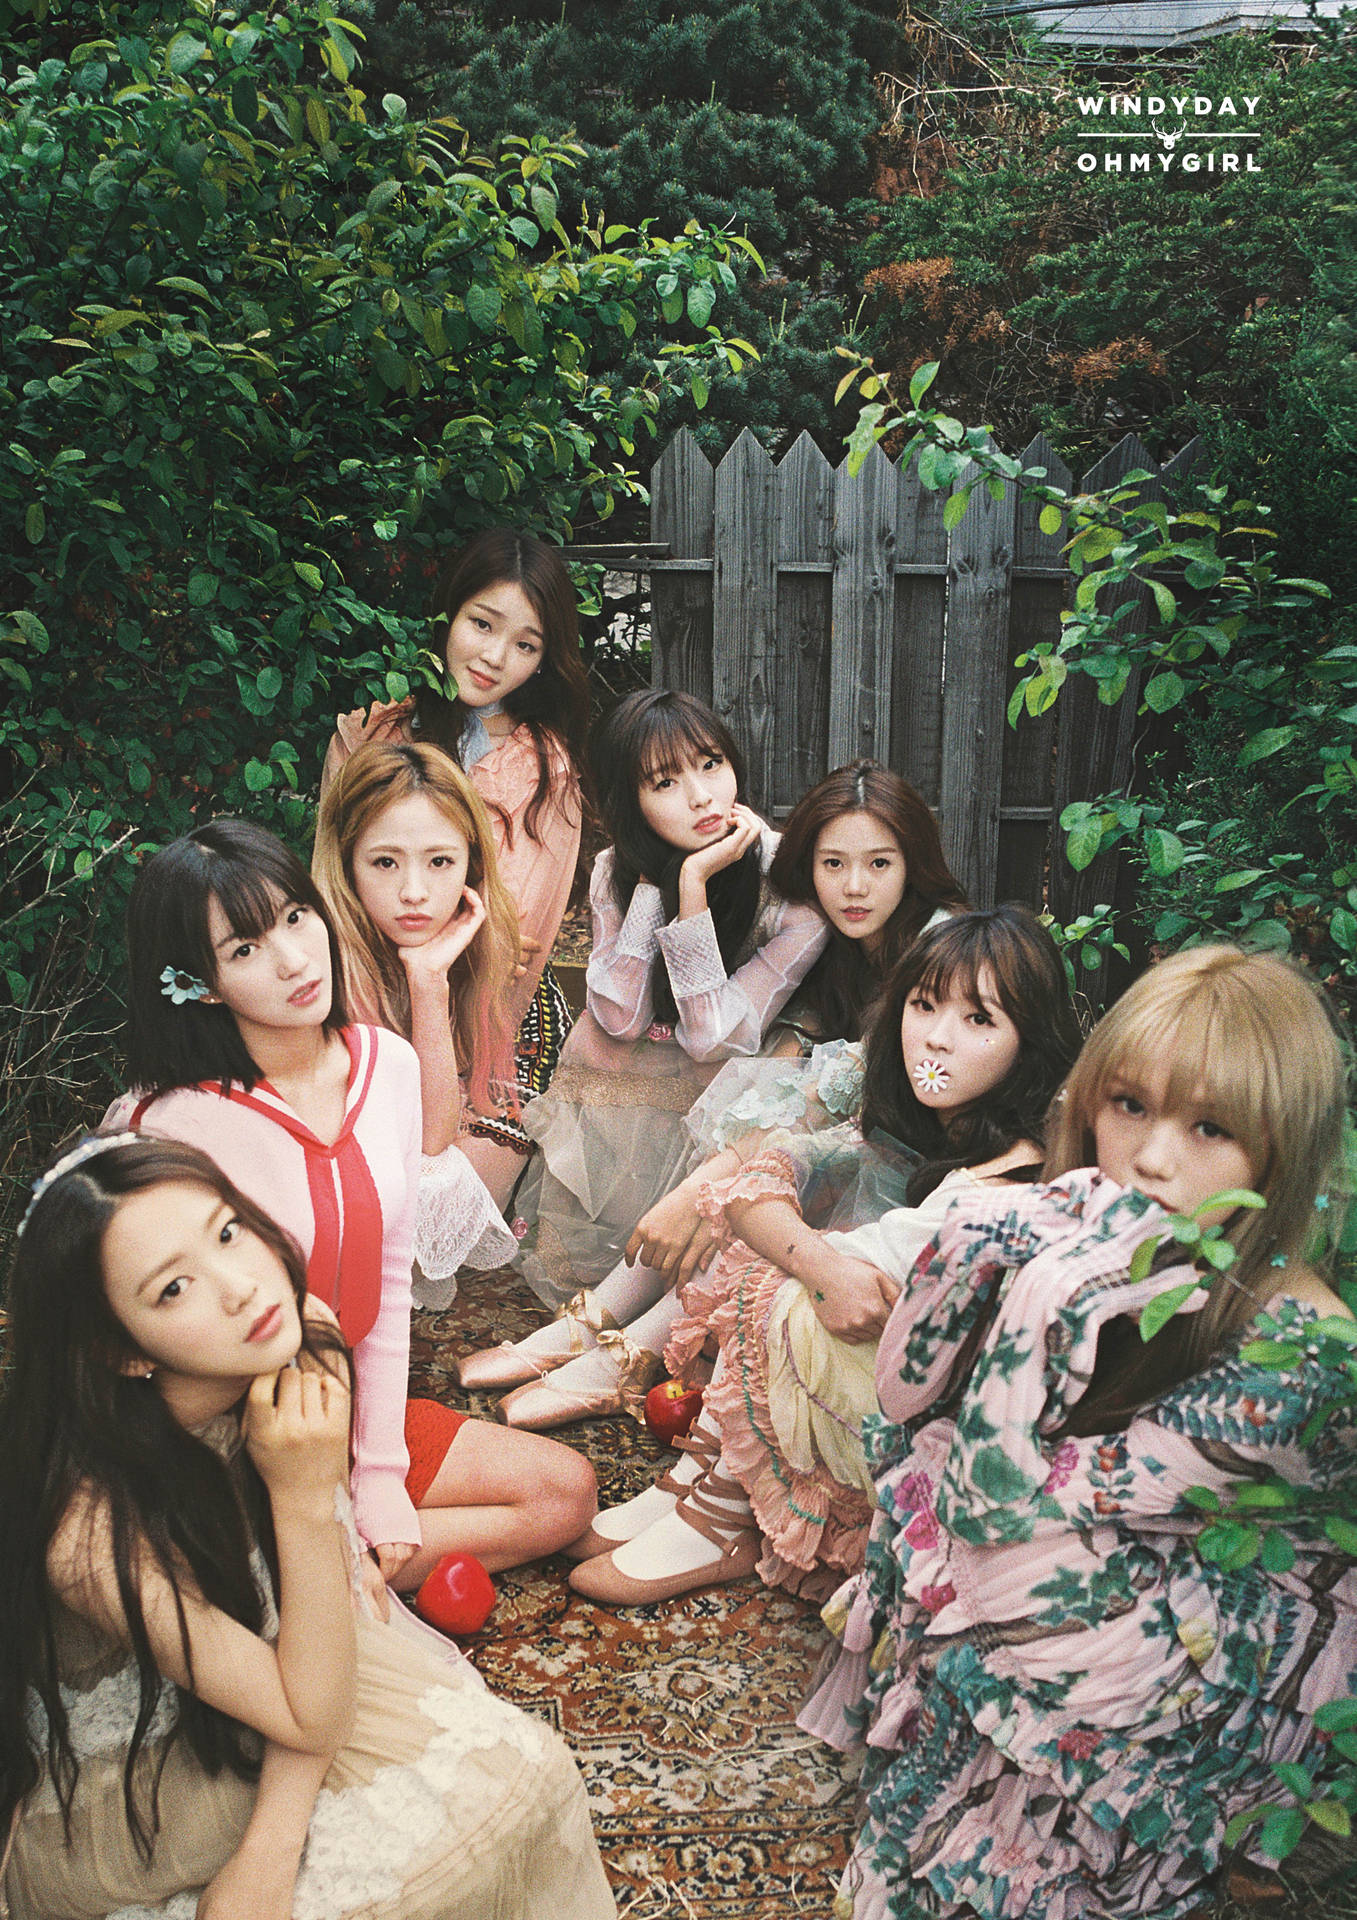 Oh My Girl Windy Day Background